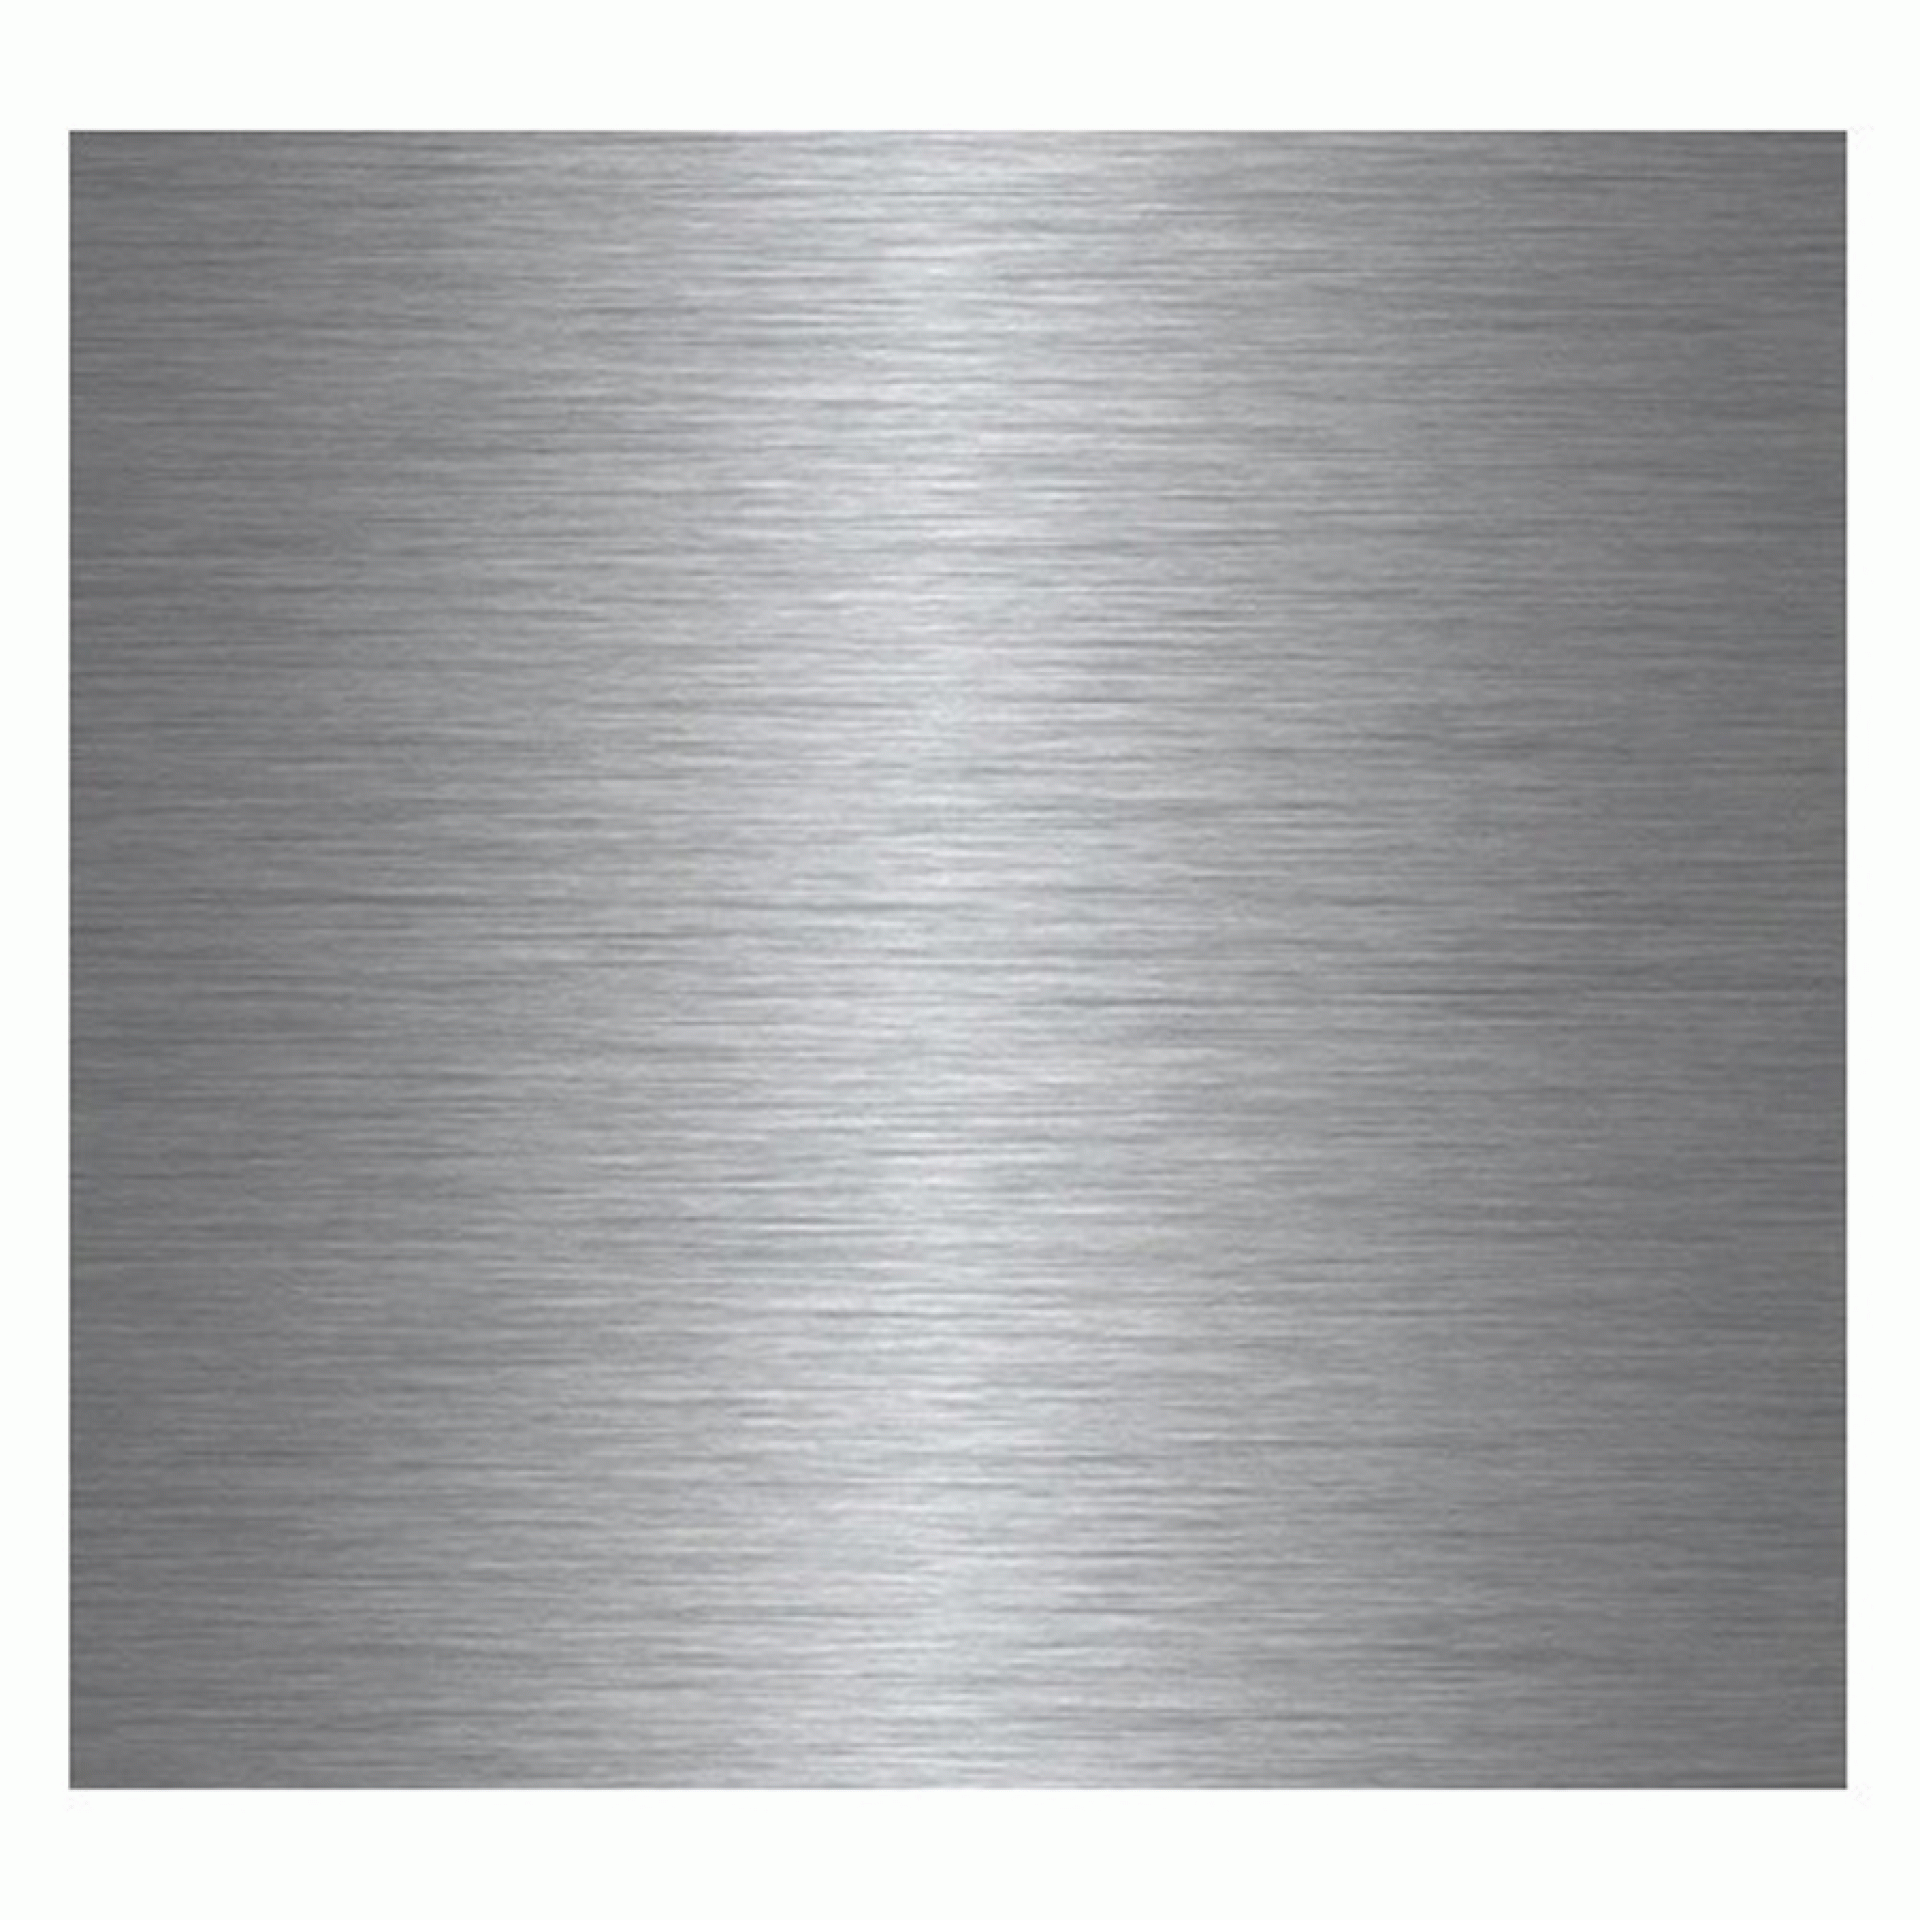 FURRION LLC | 2021123555 | REFRIGERATOR DOOR PANEL STAINLESS STEEL FOR 10 CUBIC FT (C-FCR10DCDTA-A01)